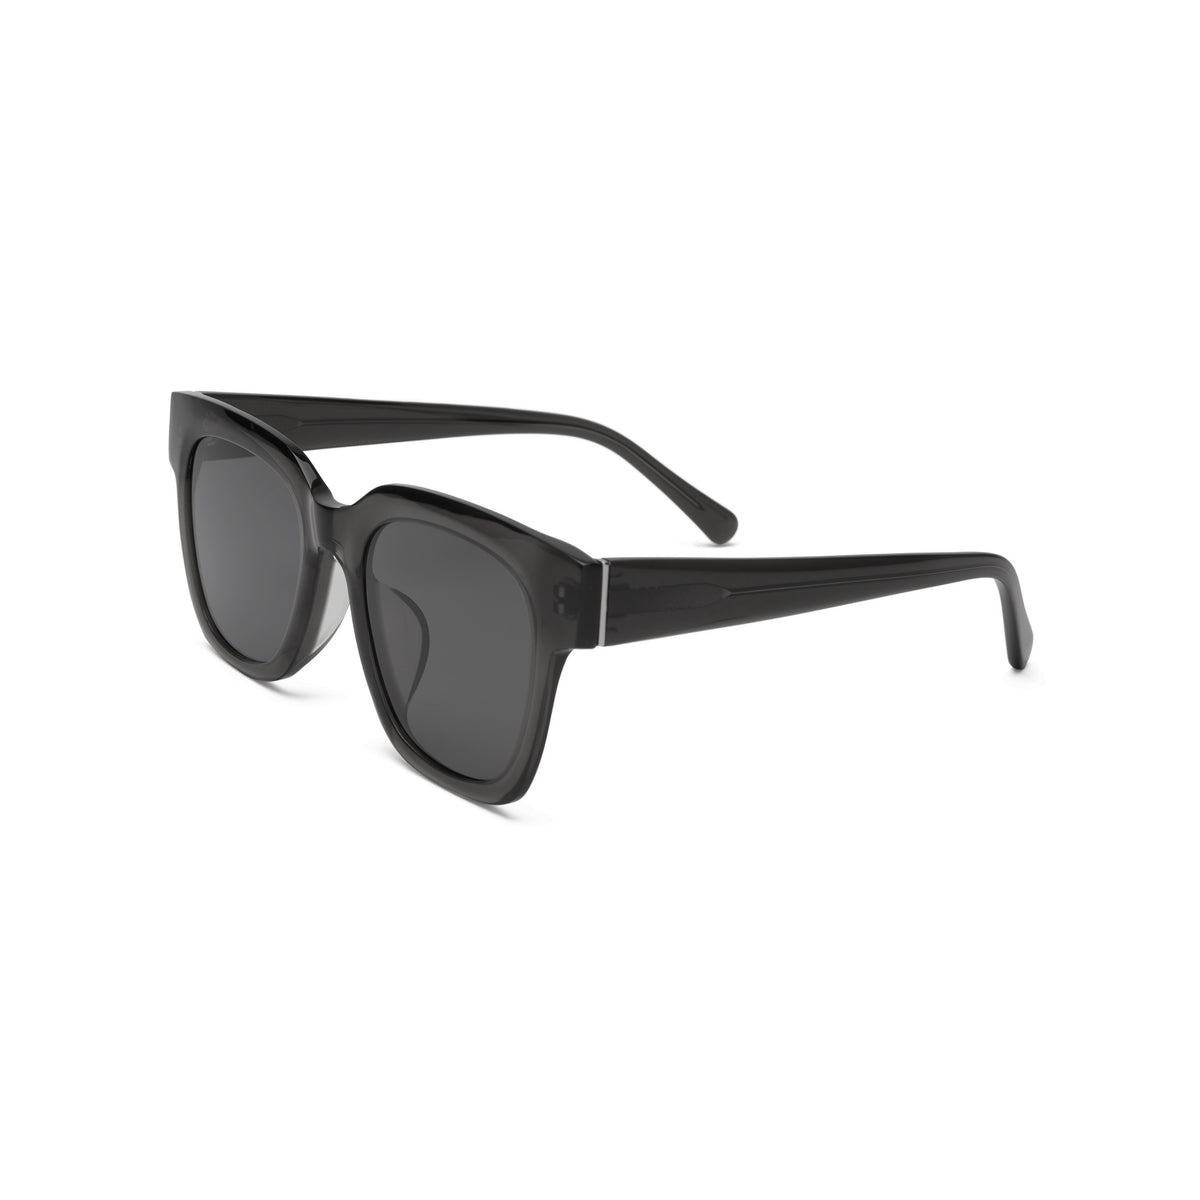 Fit Over Sunglasses, Smoke Color, 100% UVA/UVB Protection